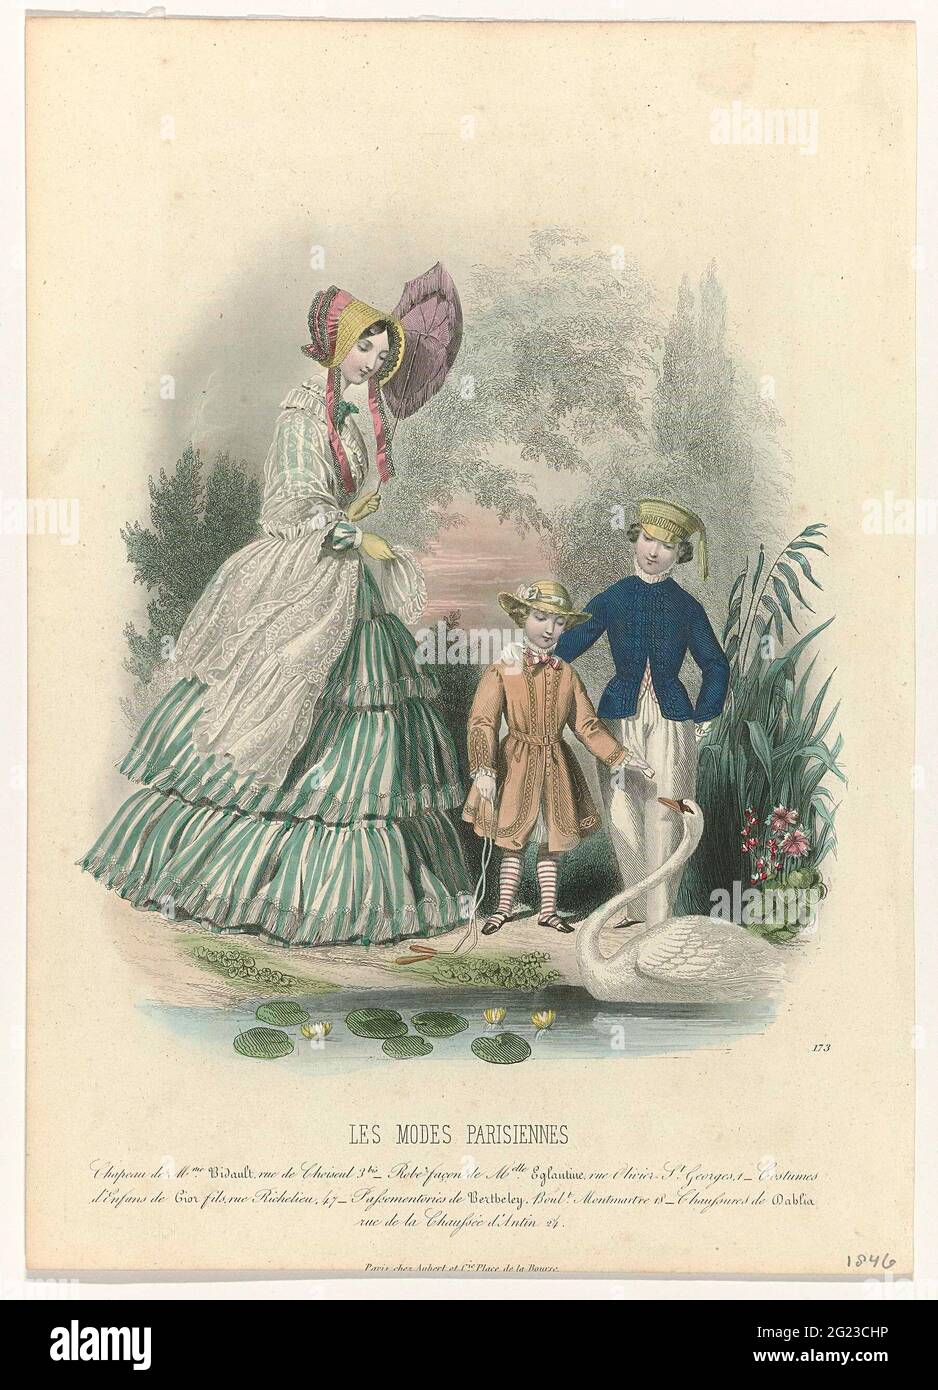 Les Modes Parisiennes, 1846, No. 173: Chapeau de Mme Bidault (...). A woman  and two children at a pond with swan. The woman wears a transparent scarf  with curl motif on a